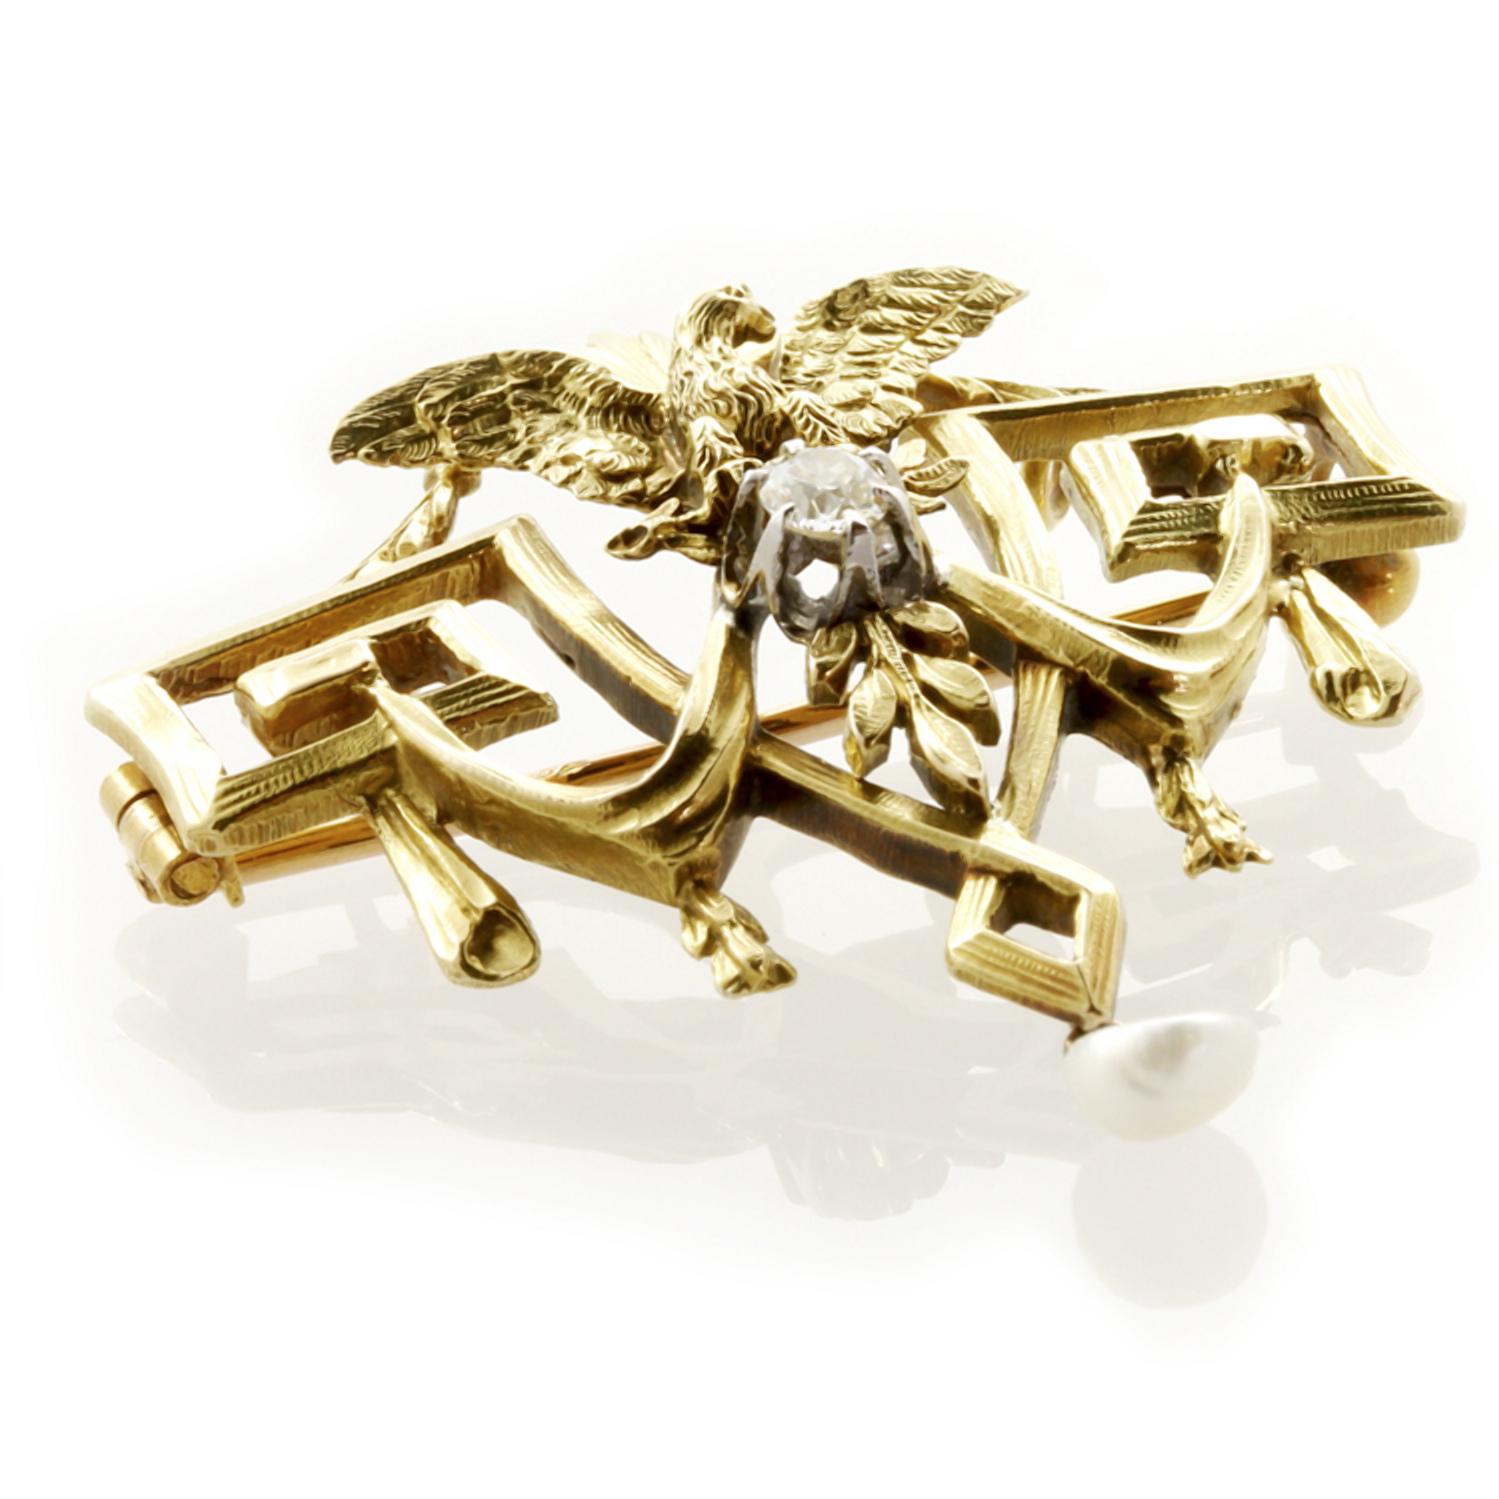 A Belle Époque carved yellow gold eagle brooch, of neo-classical design including swags, Greek-key motifs and a centrally carved eagle surmounting a single claw-set old brilliant-cut diamond estimated to weigh 0.2 carats, all mounted in gold and